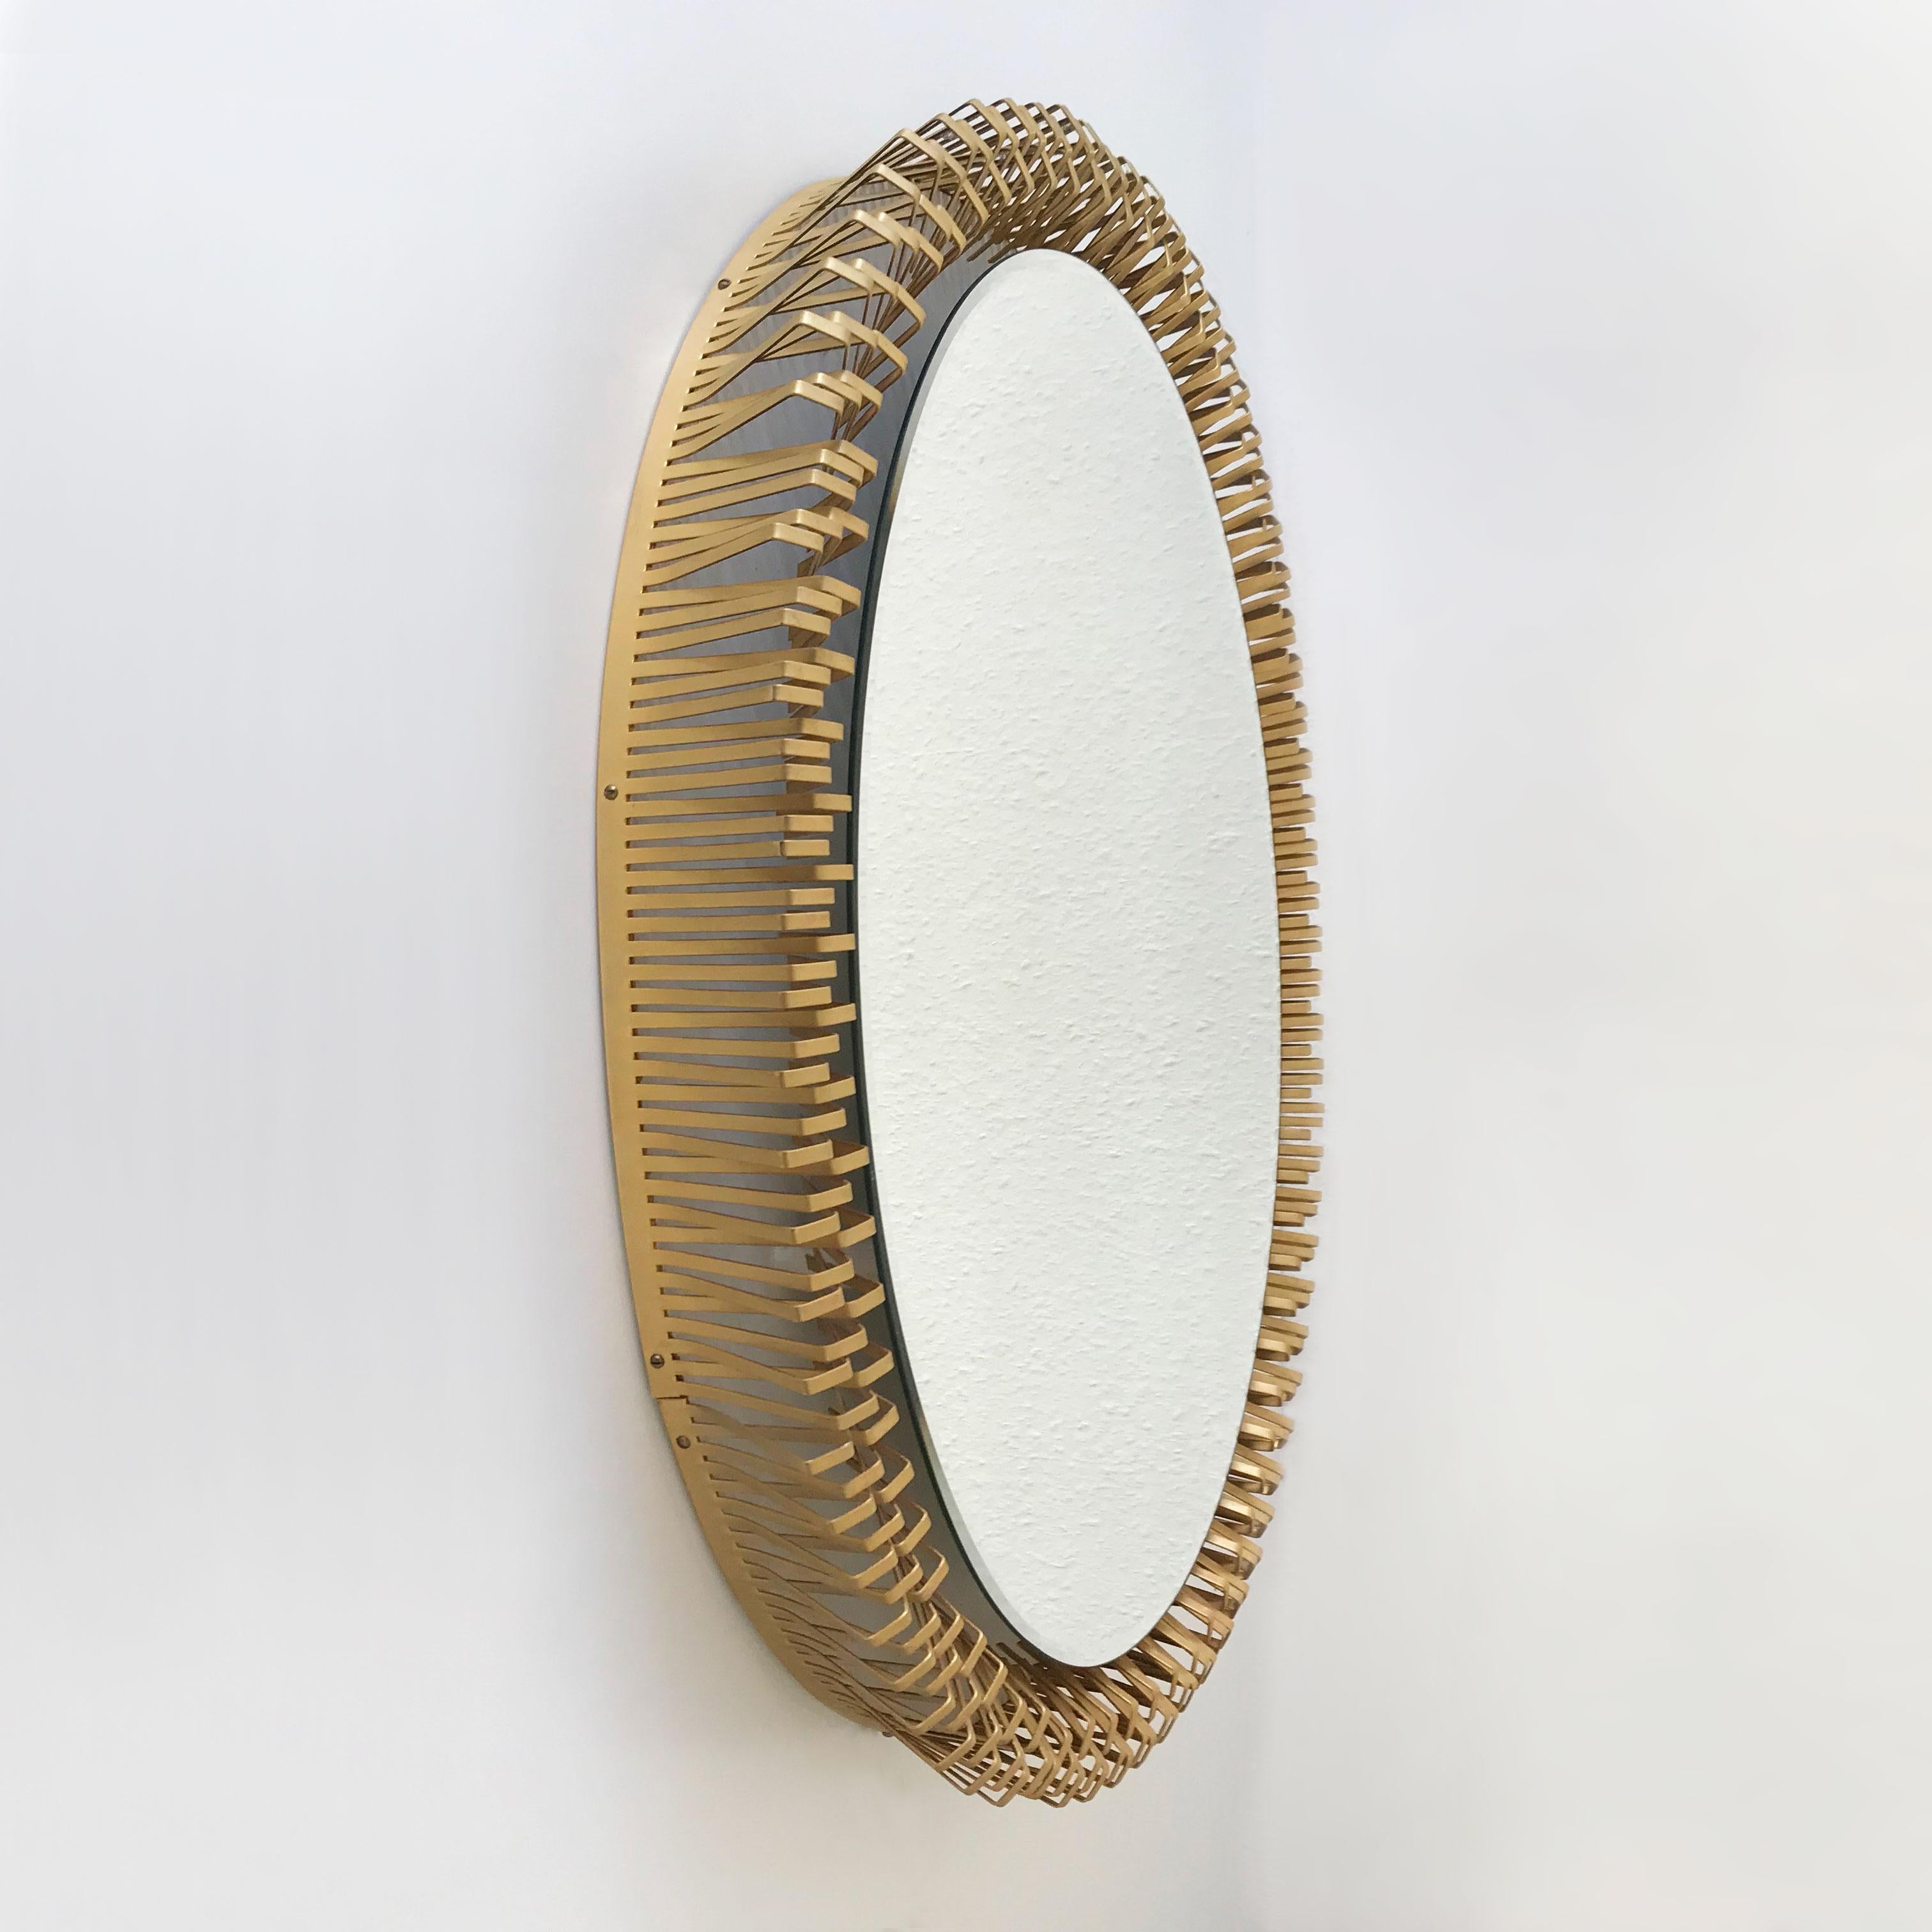 Exceptional Mid-Century Modern Backlit Wall Mirror by Schöninger, 1950s, Germany 4